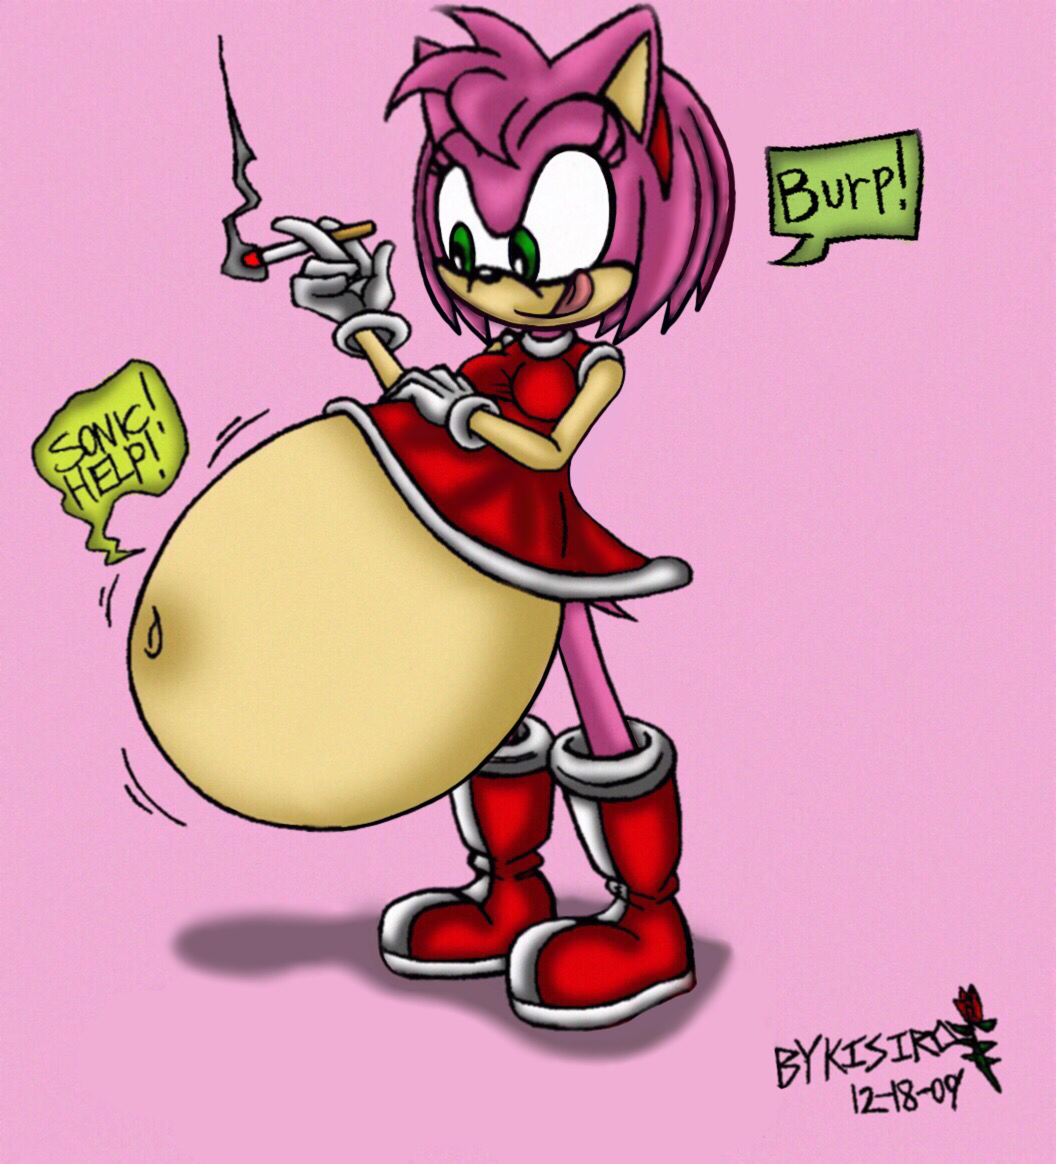 Amy eats tails